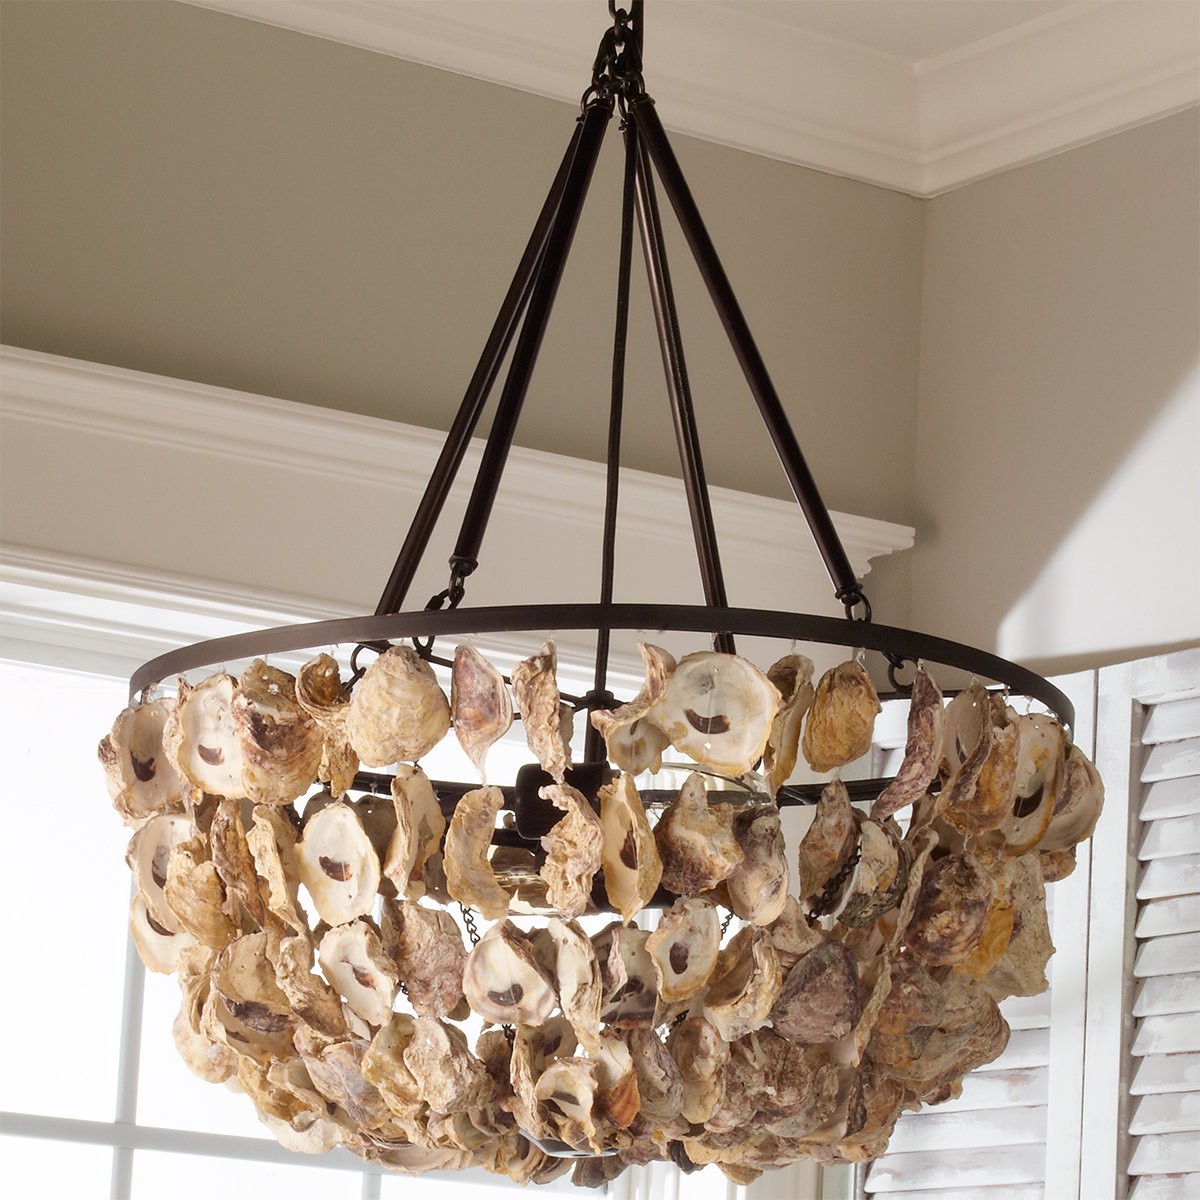 Oyster shell basket chandelier shades of light